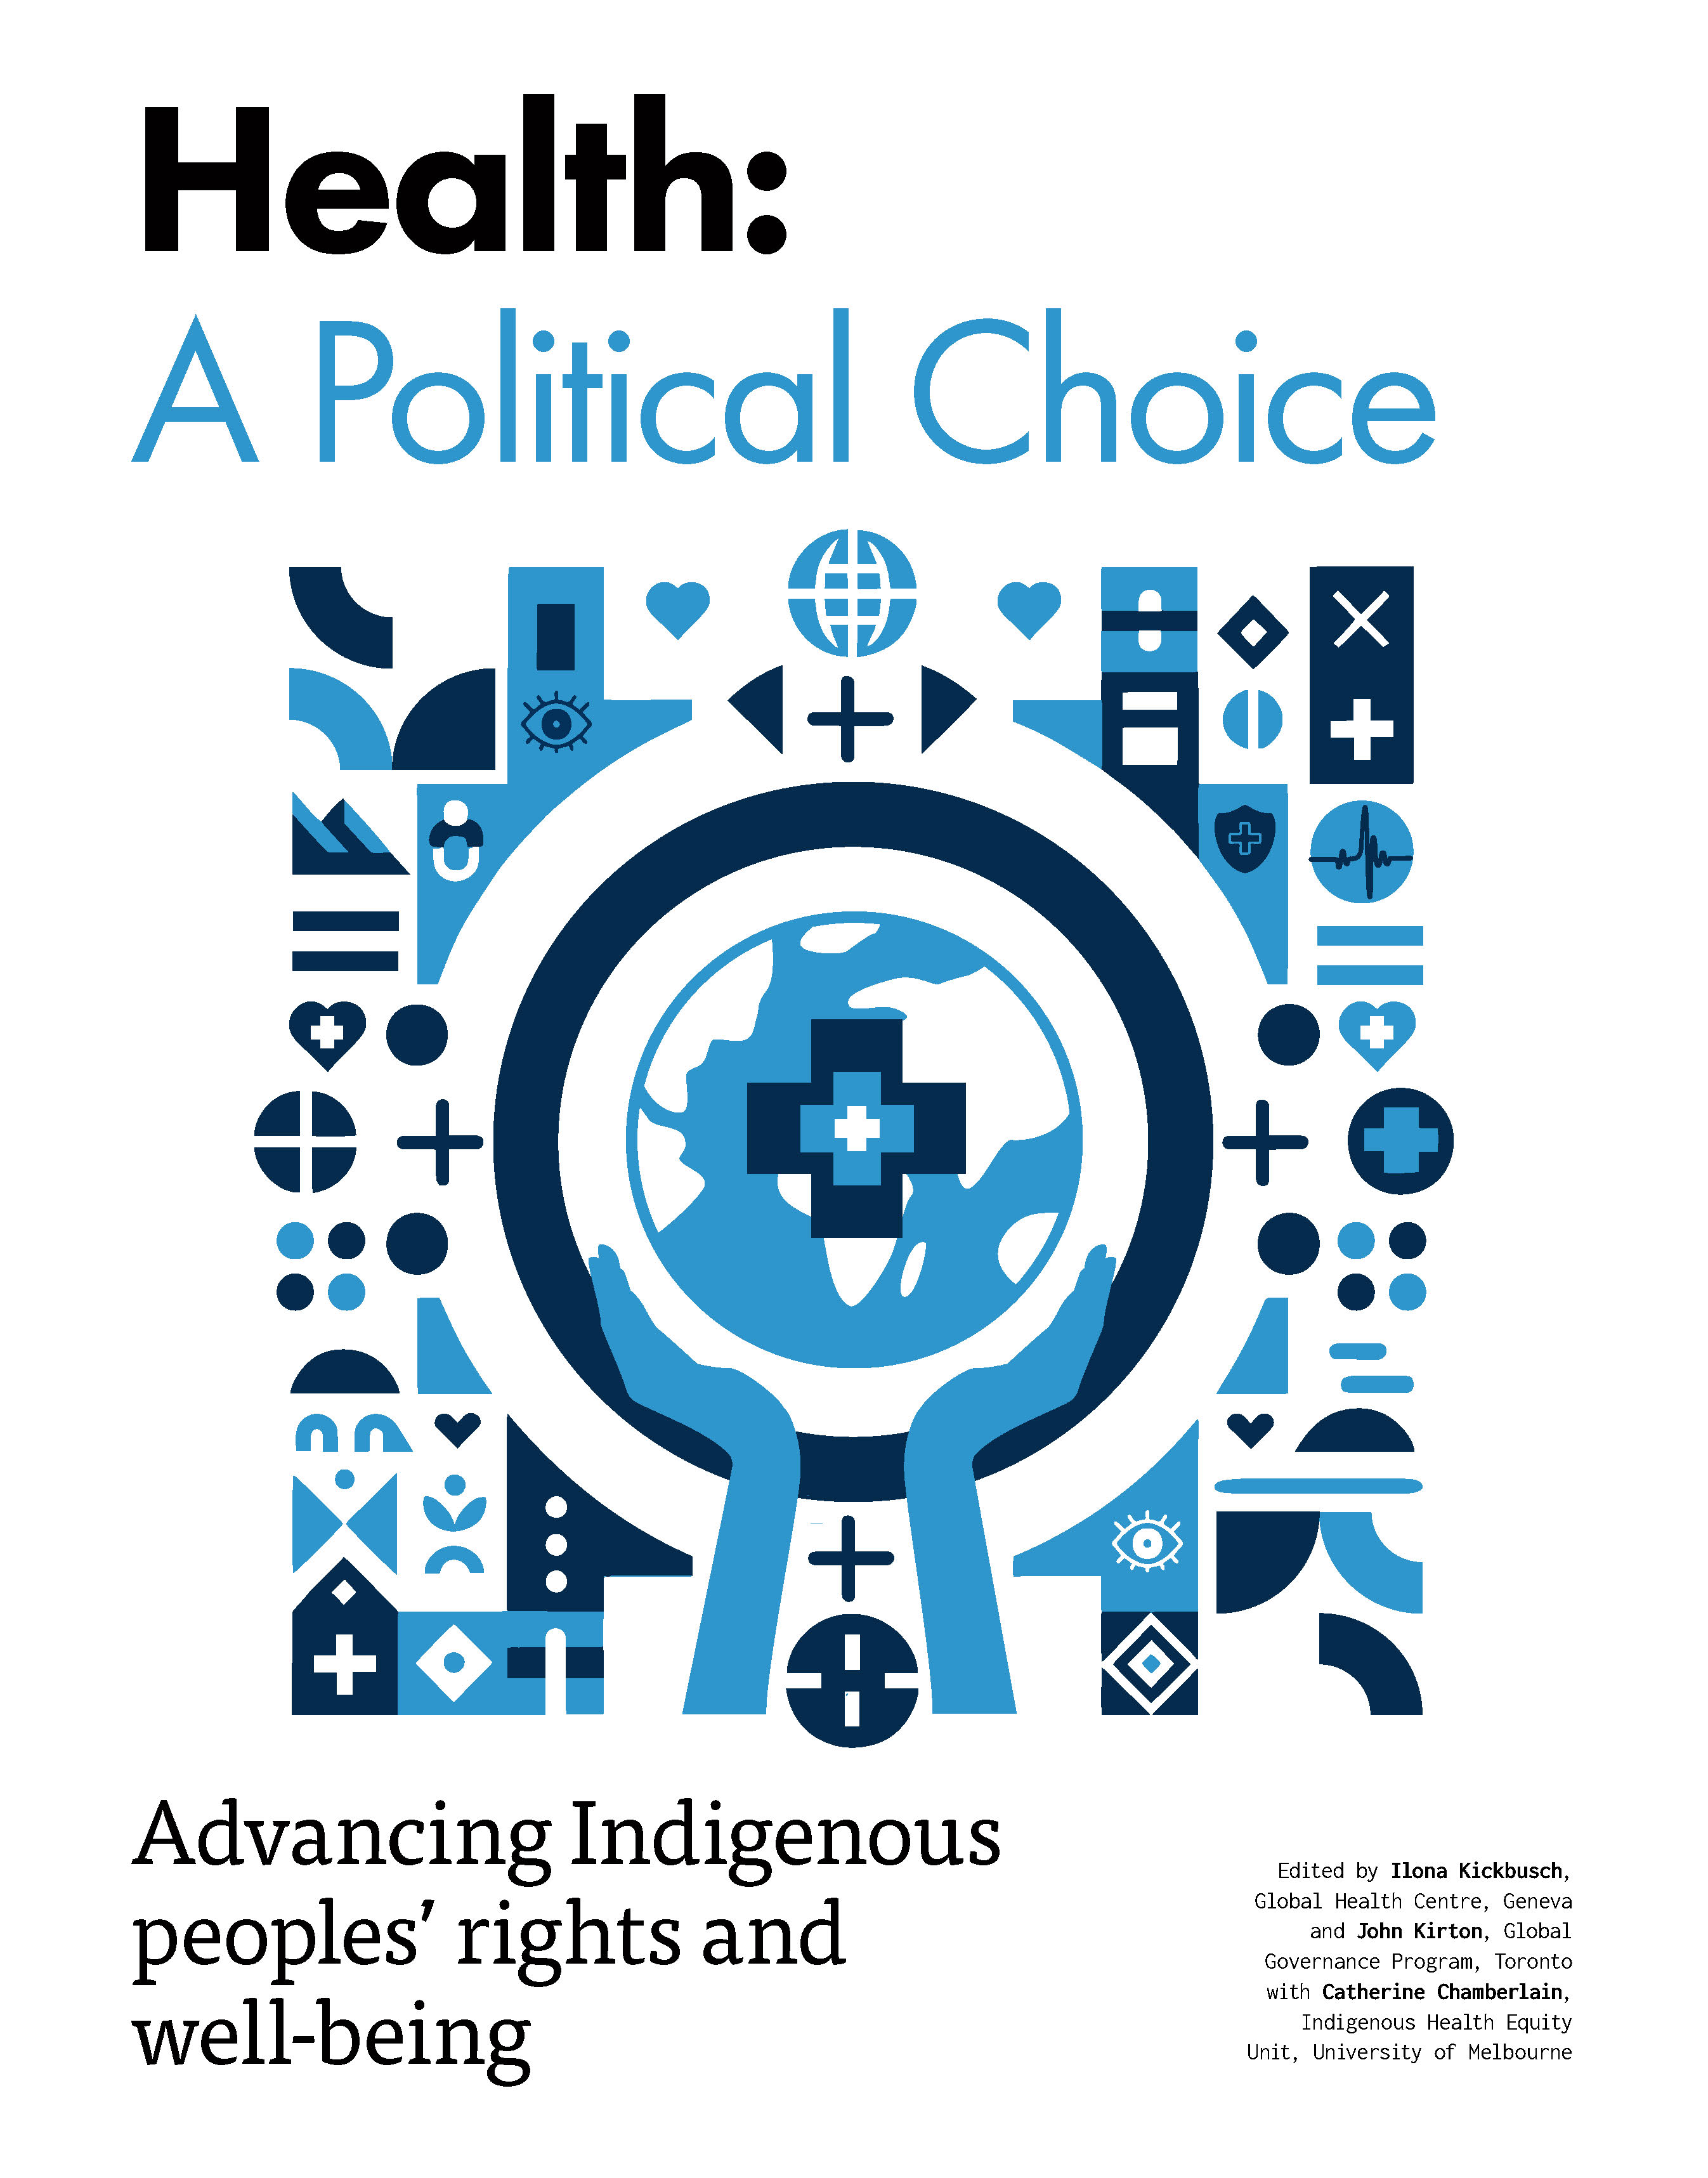 Health: A Political Choice – Advancing Indigenous Peoples' Rights and Well-Being